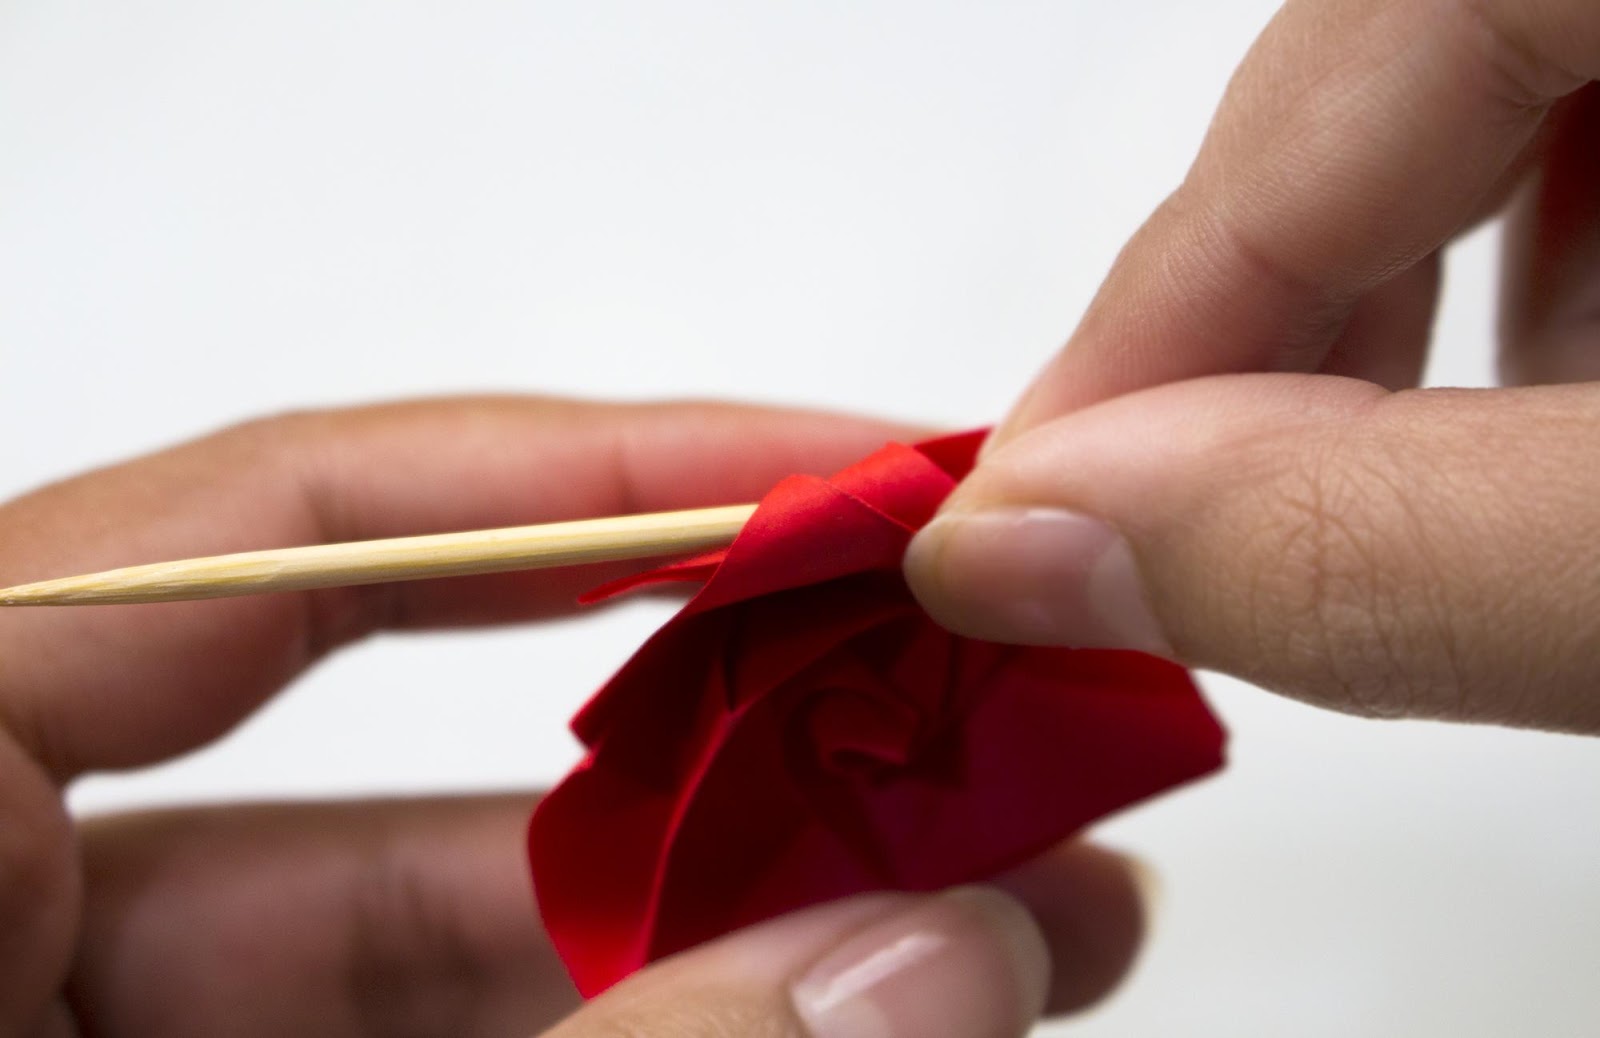 A wooden chopstick is used to curl the edges of an origami flower petal